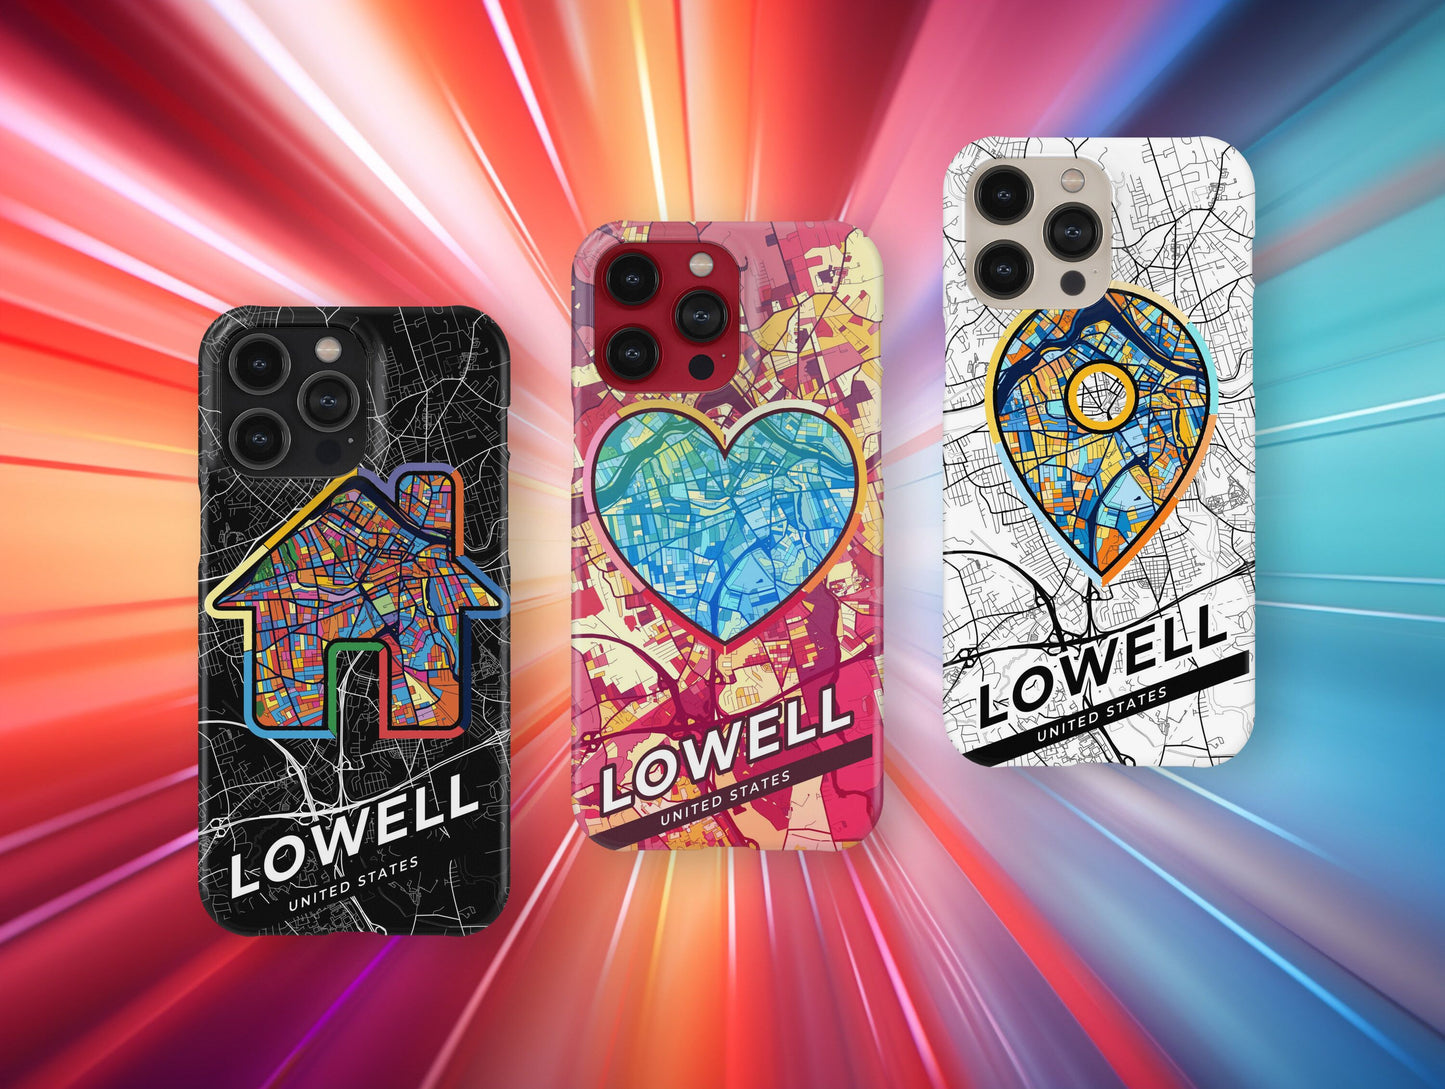 Lowell Massachusetts slim phone case with colorful icon. Birthday, wedding or housewarming gift. Couple match cases.